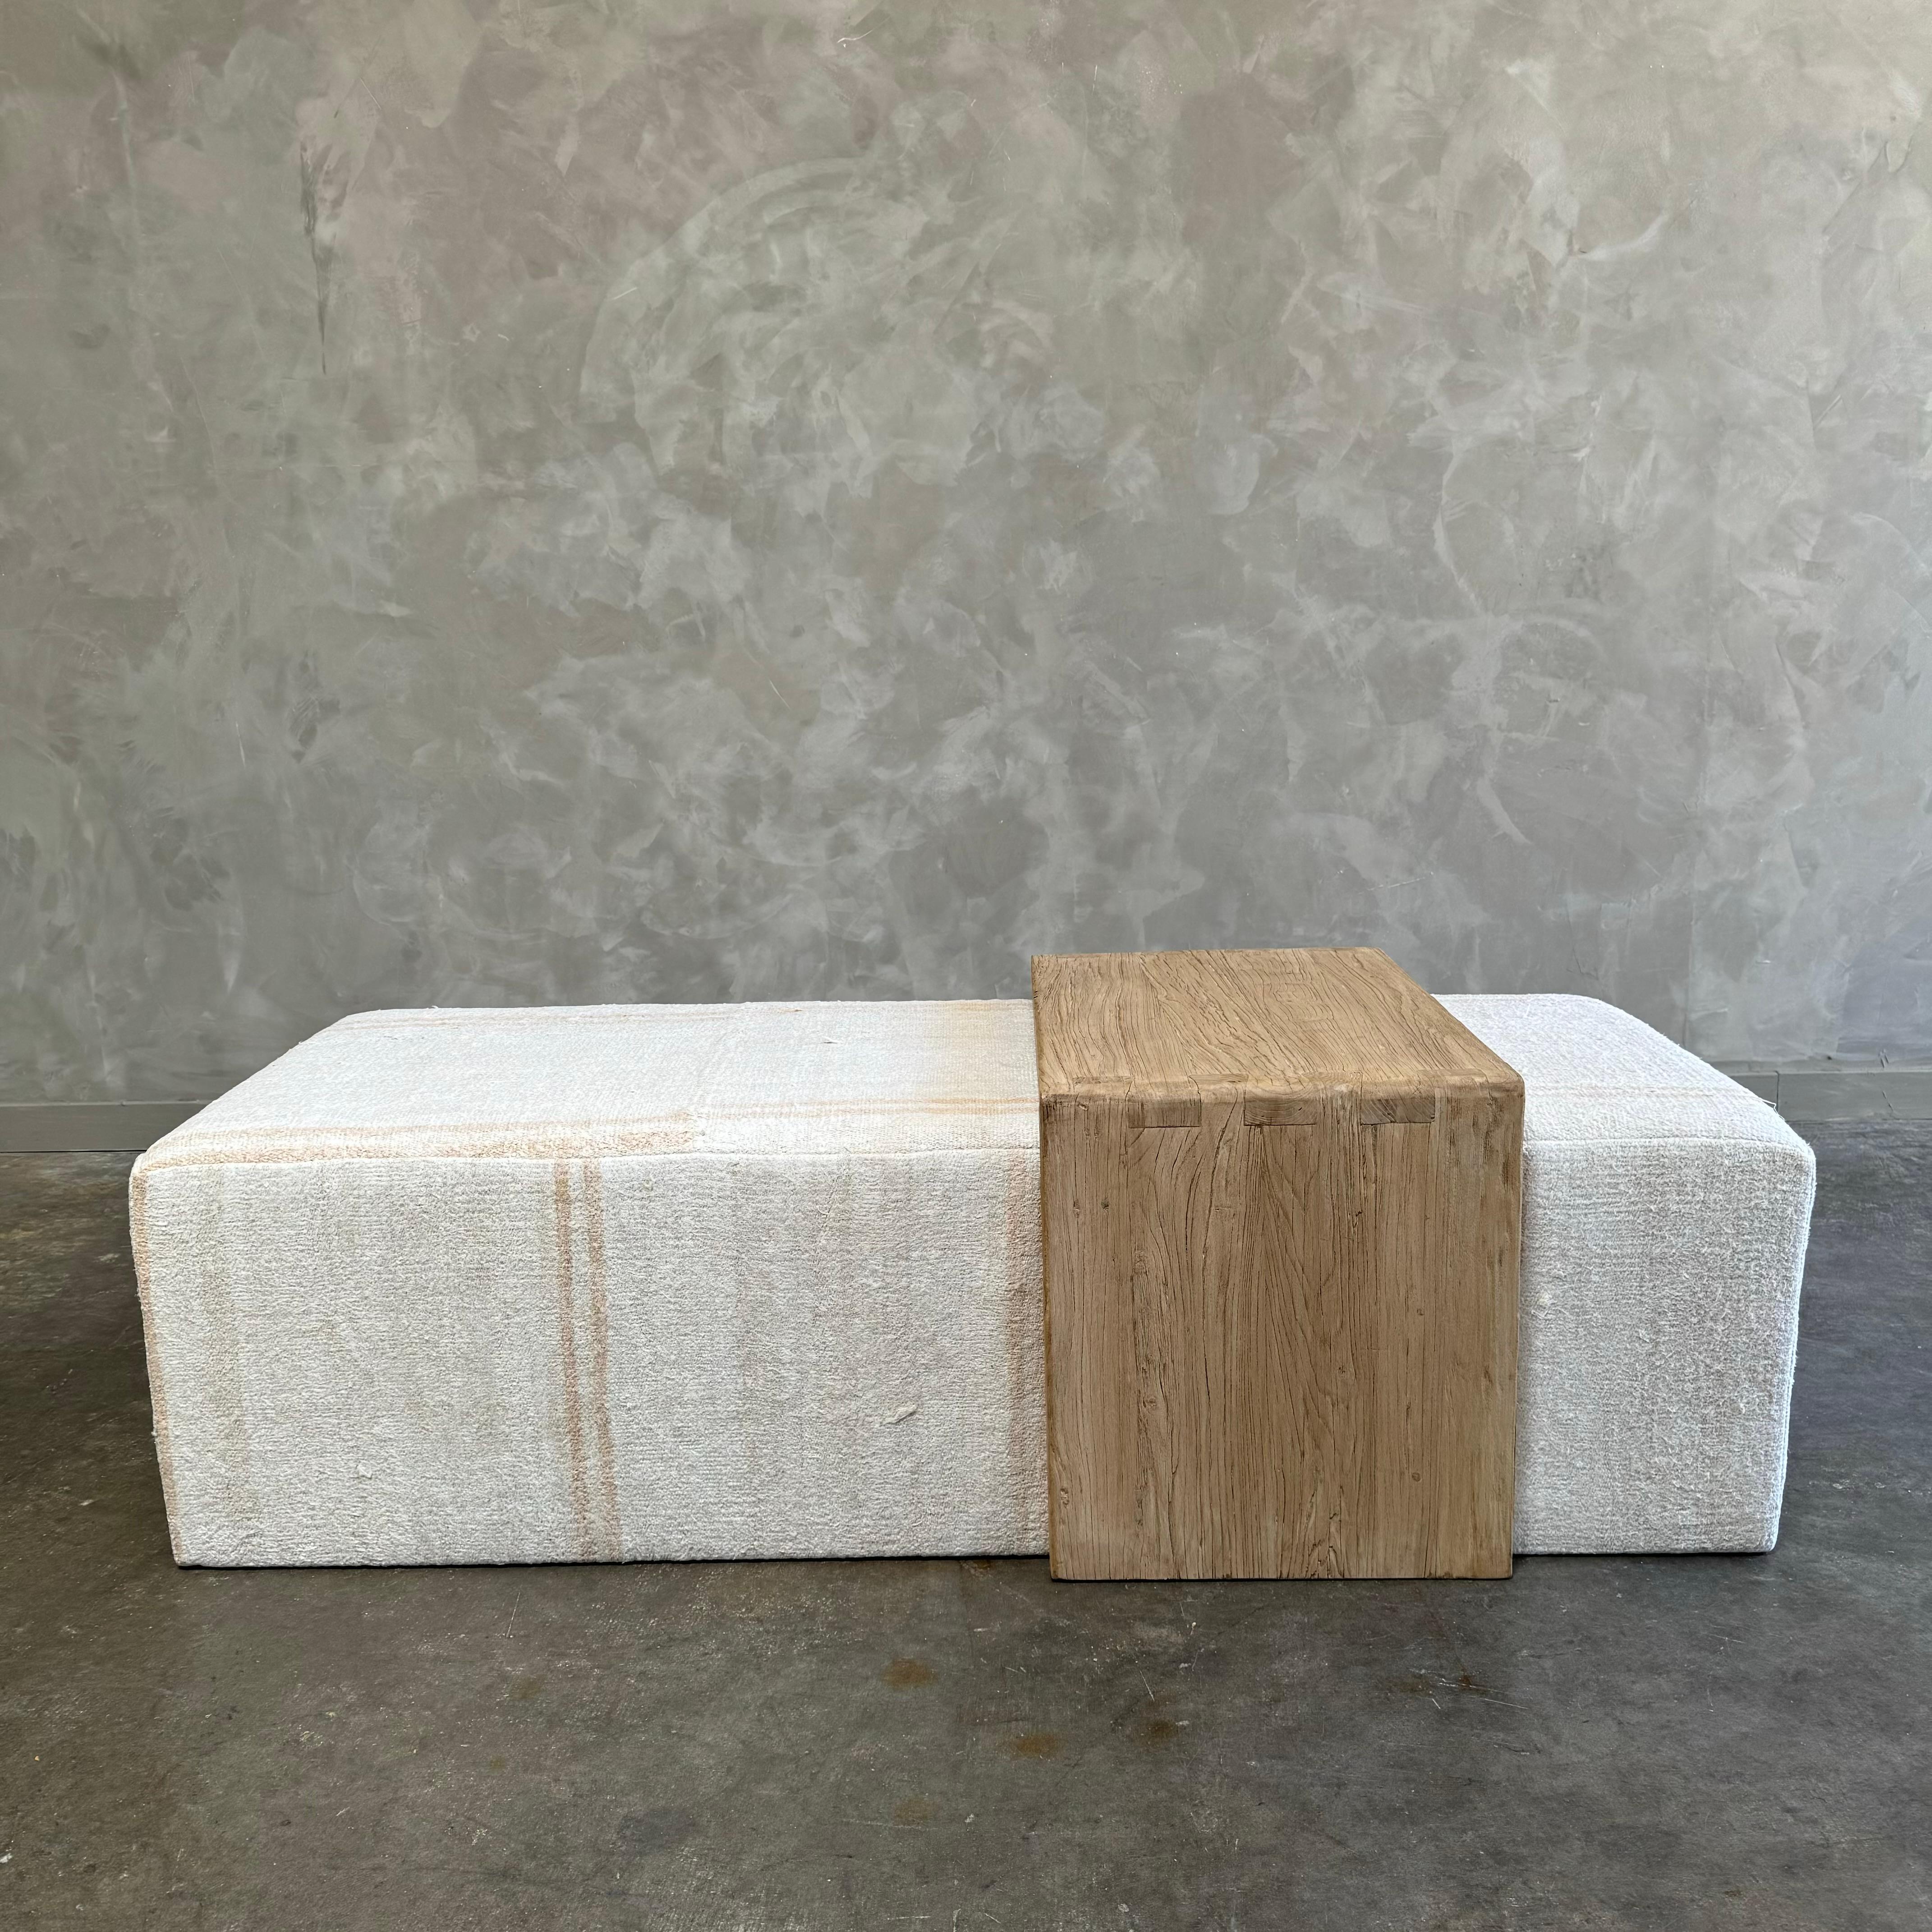 Our cube ottoman is upholstered in a beautiful hemp rug. A light color with flax natural stripes give this a vintage hemp rug ottoman a versatile style. The hand-crafted solid elm wood waterfall table has unique characteristics with beautiful grain